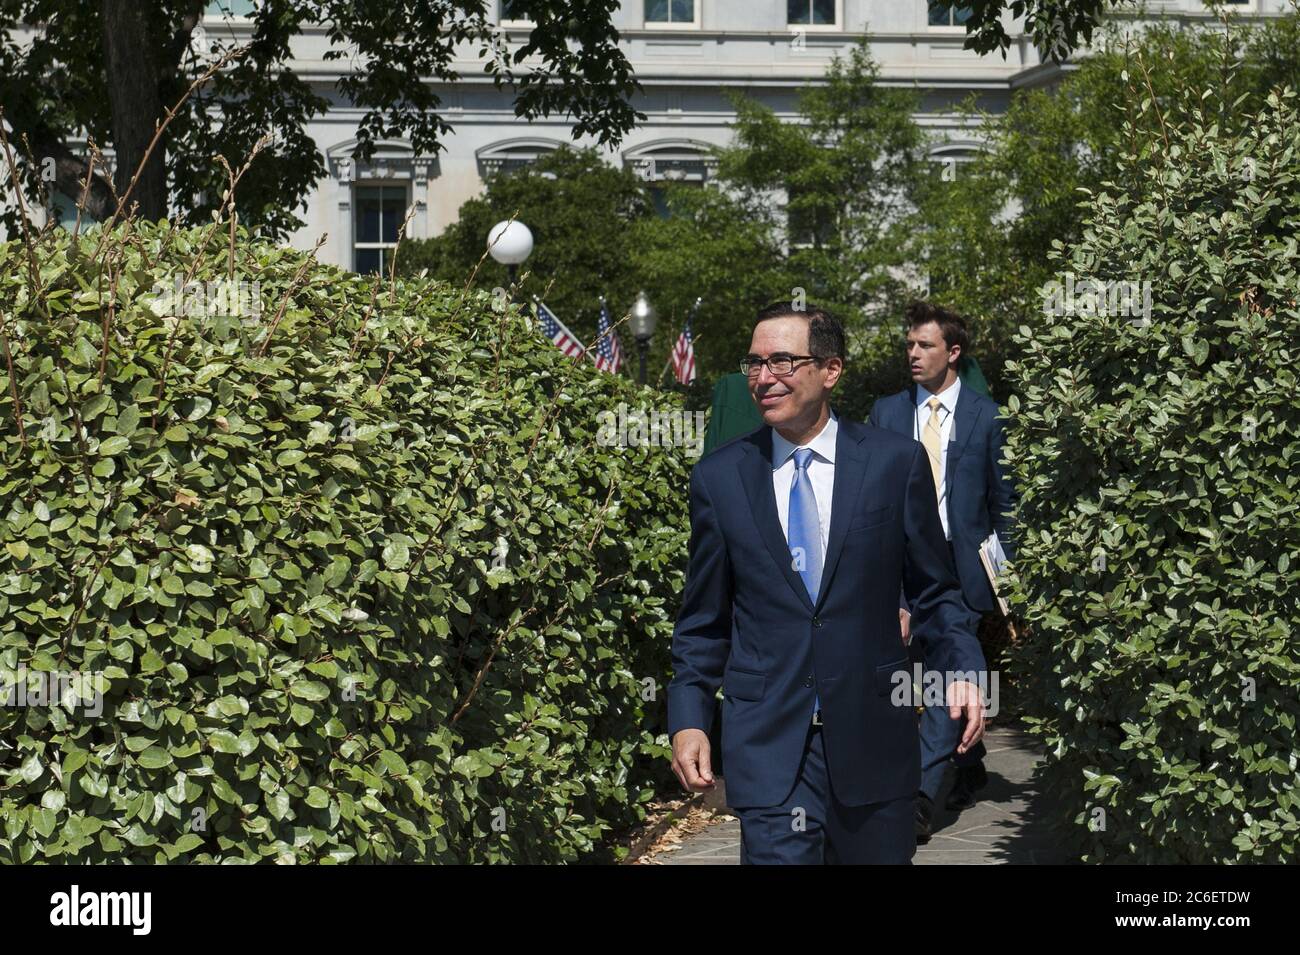 Washington, United States. 09th July, 2020. United States Secretary of the Treasury Steven Mnuchin makes his way to the West Wing at The White House following the Supreme Court ruling that a New York prosecutor is entitled to see President Trump's private and business financial records, in Washington, DC. on Thursday, July 9, 2020. Photo by Rod Lamkey/UPI Credit: UPI/Alamy Live News Stock Photo